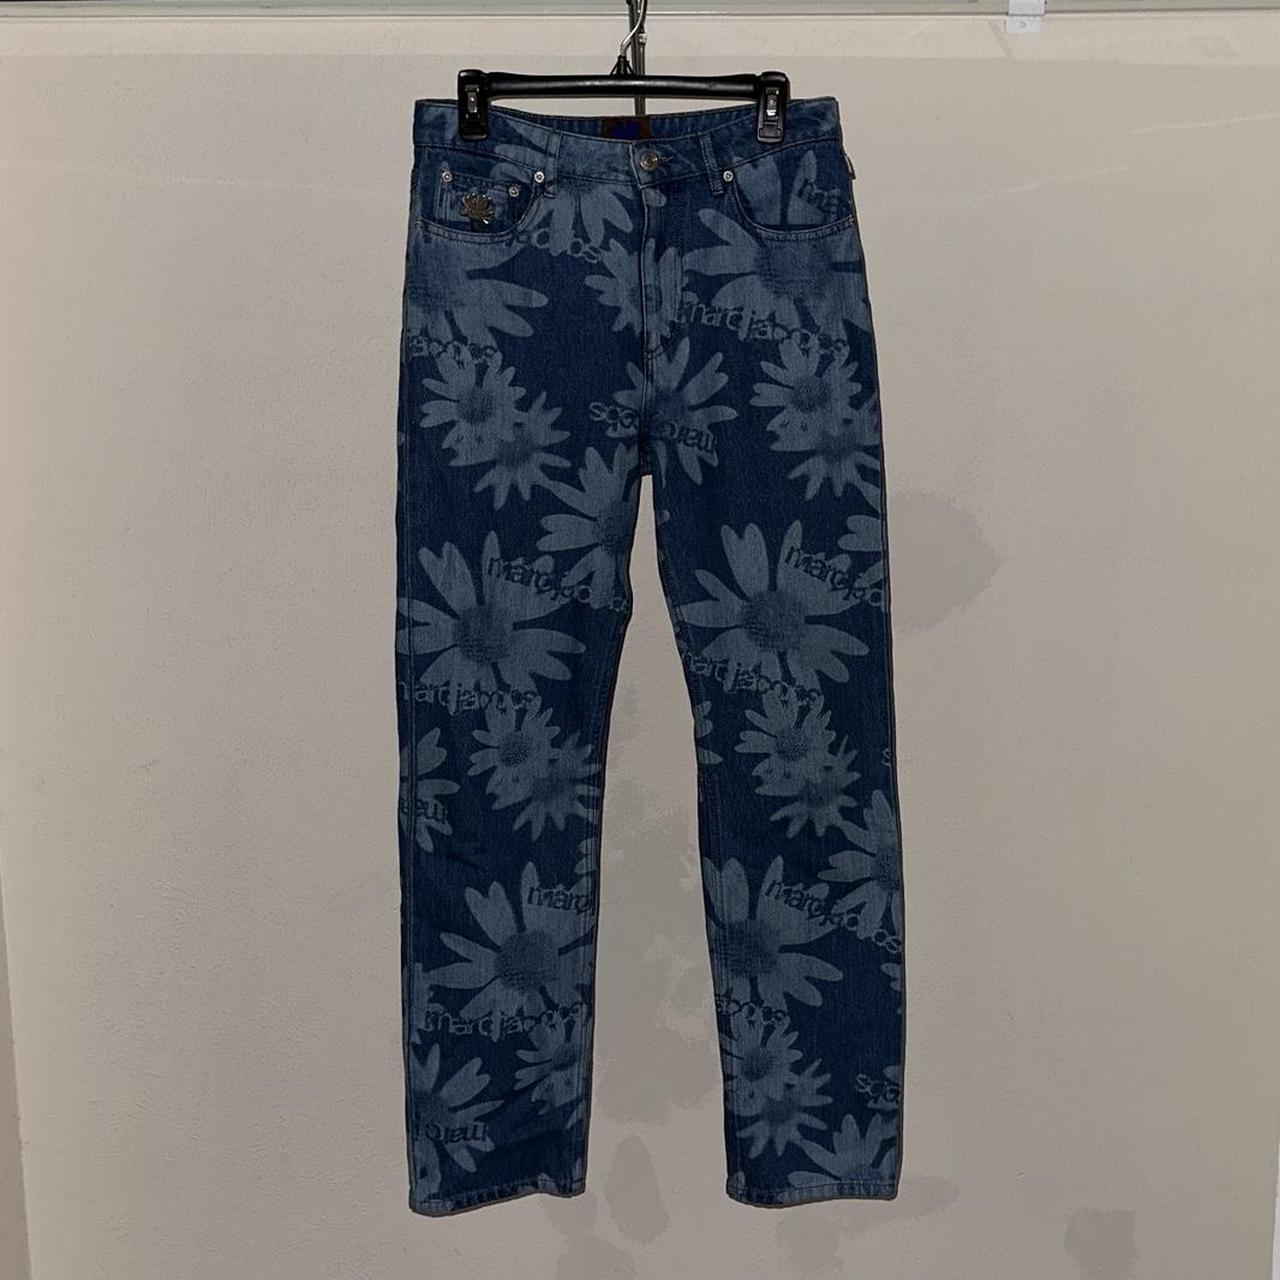 Heaven Marc Jacobs floral laser printed jeans with a...